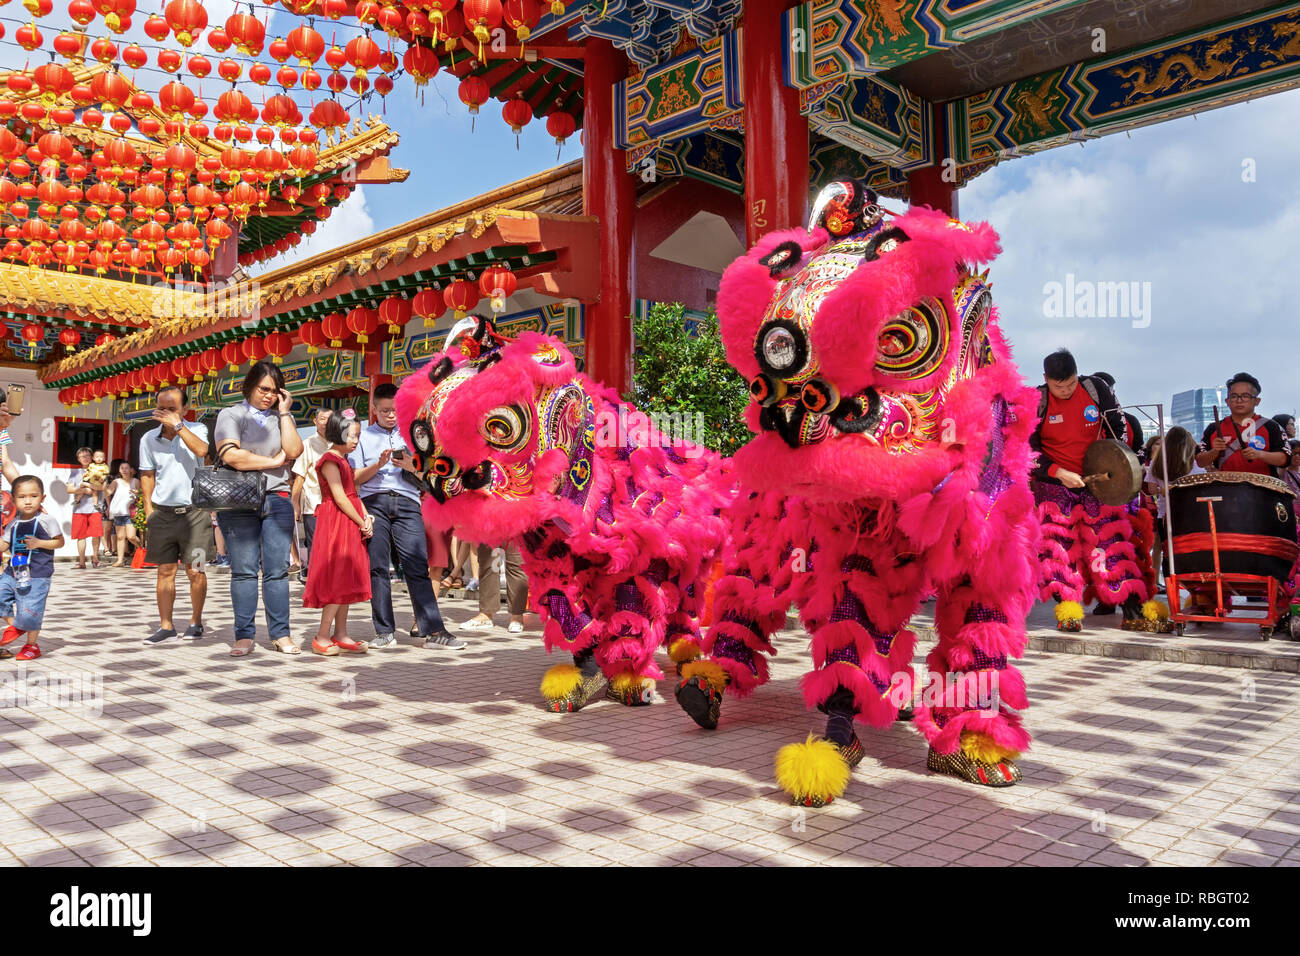 Kuala Lumpur, Malaysia - February 16, 2018: Lion dance during Chinese New Year celebration in Thean Hou Temple. Stock Photo